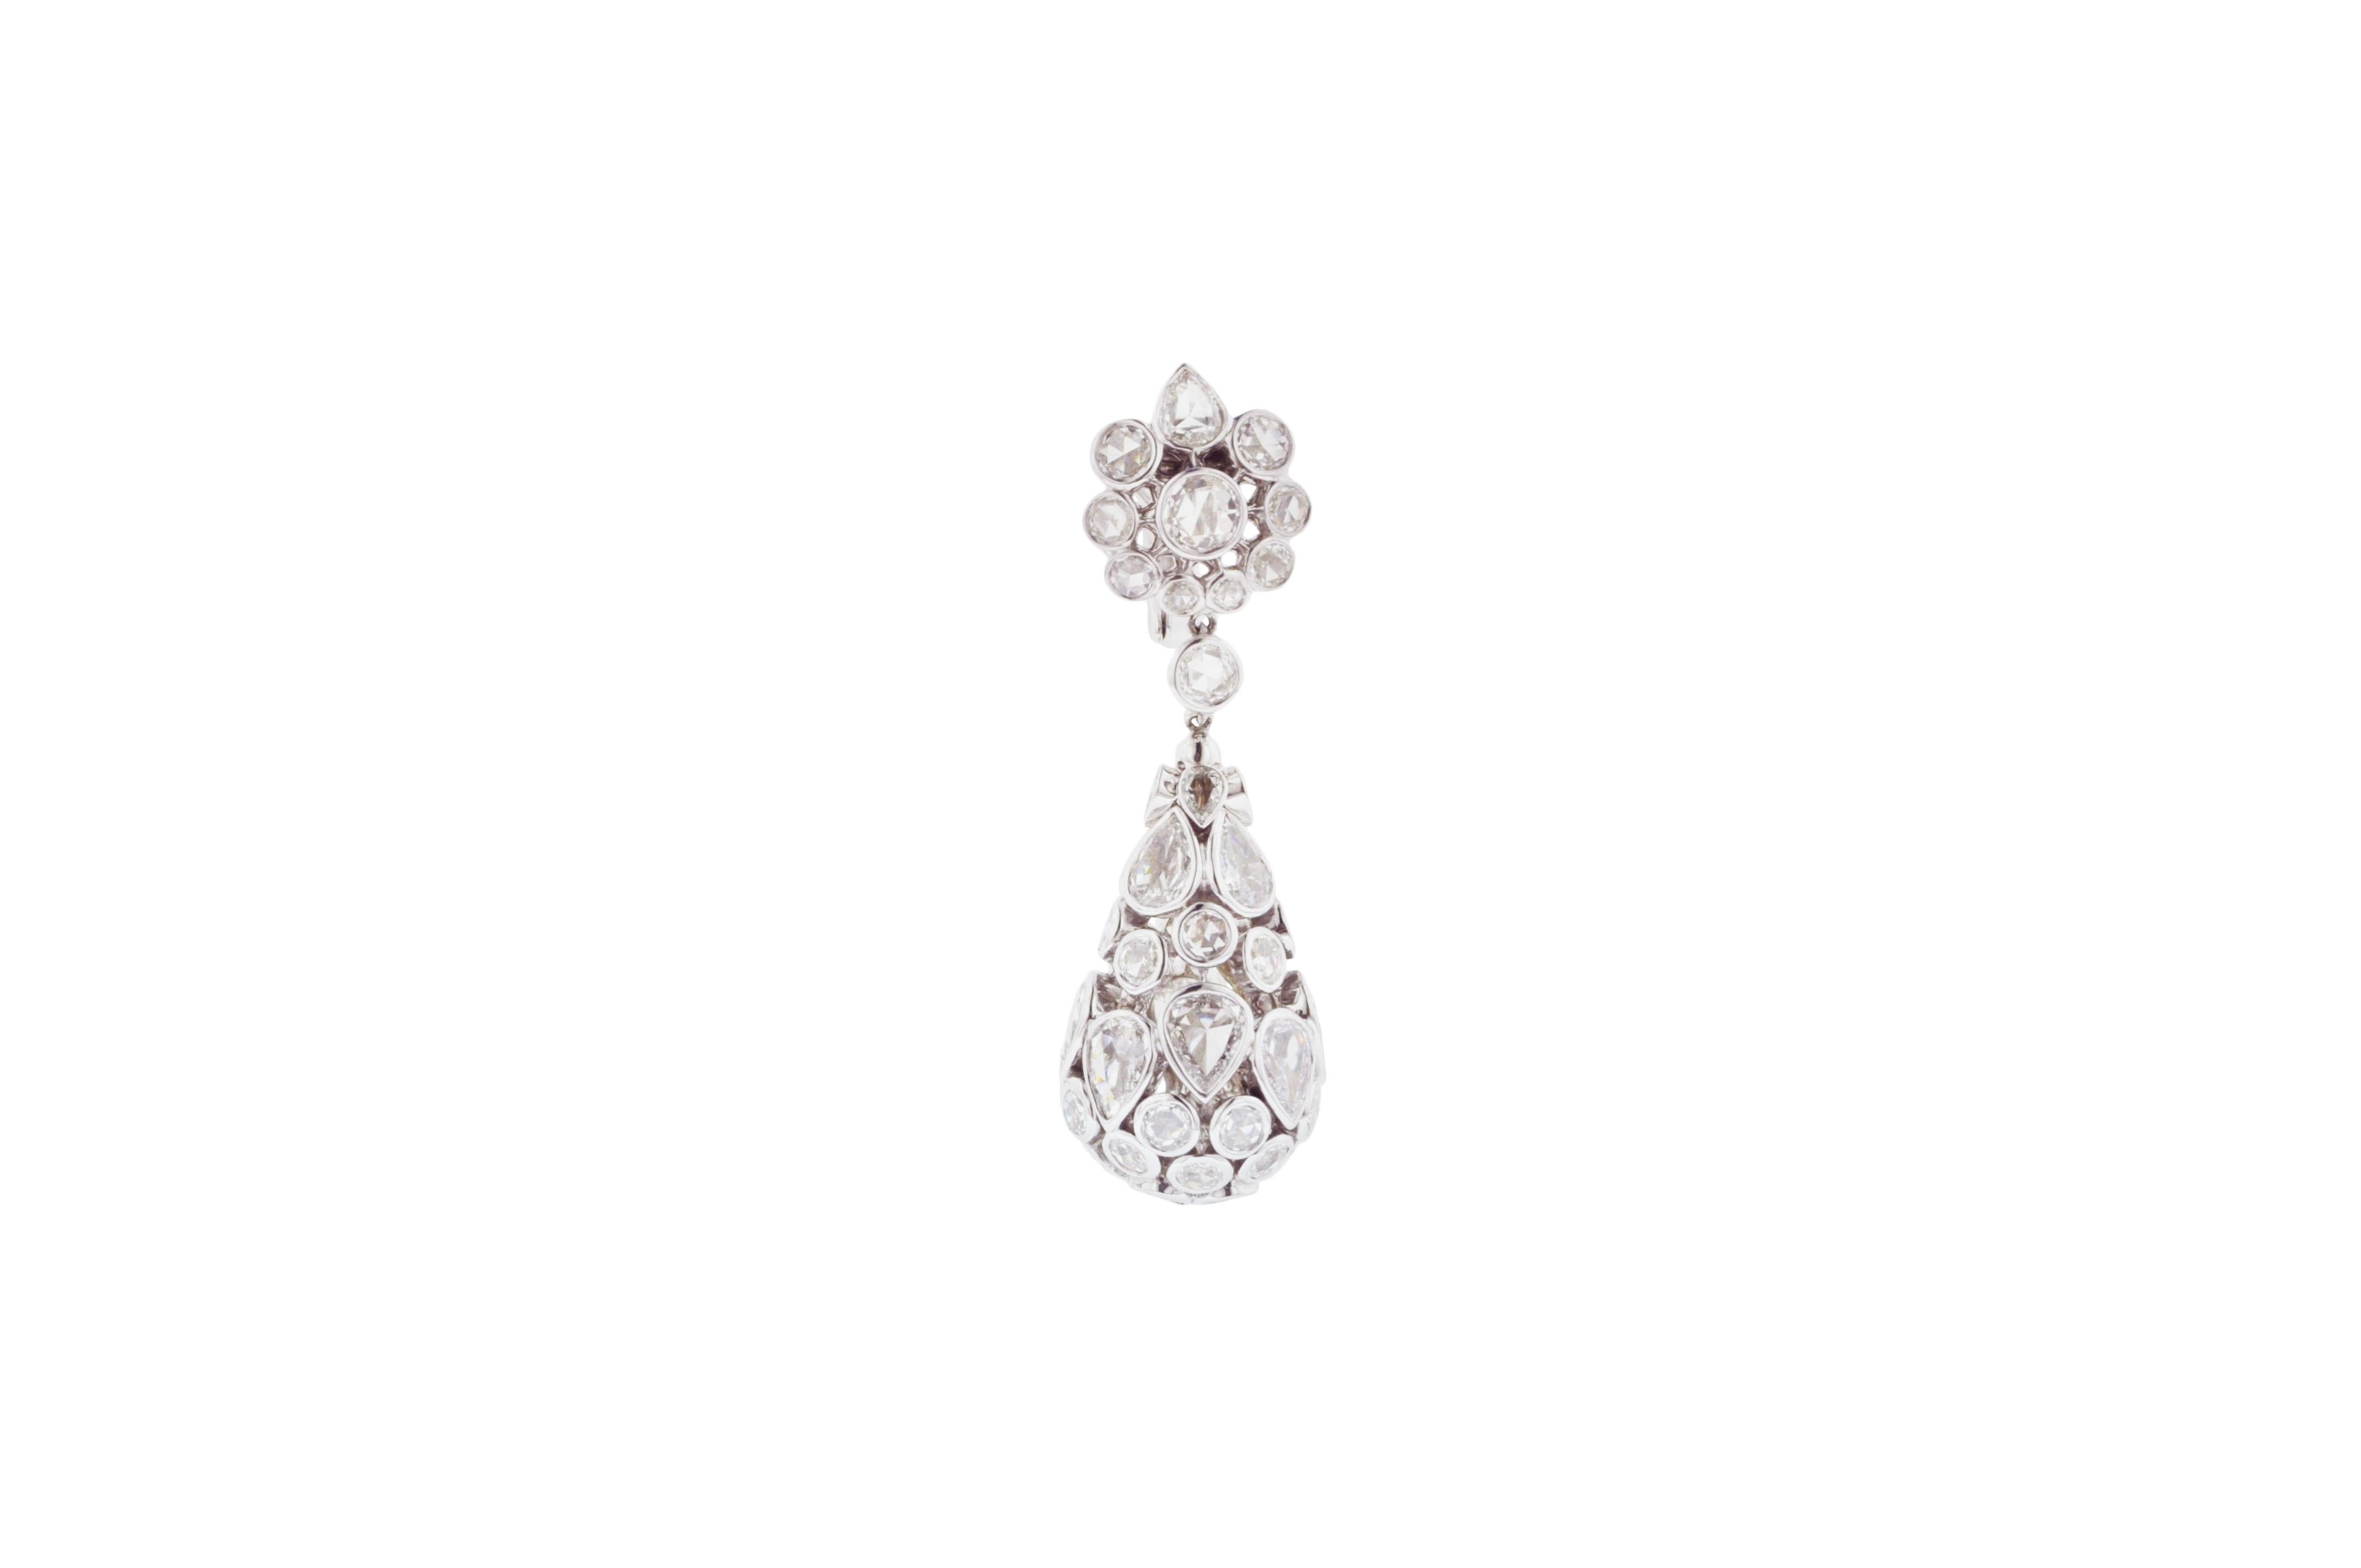 18K white gold drop earrings featuring 110 pear-shaped and round rose-cut diamonds weighing approximately 9.18 carats